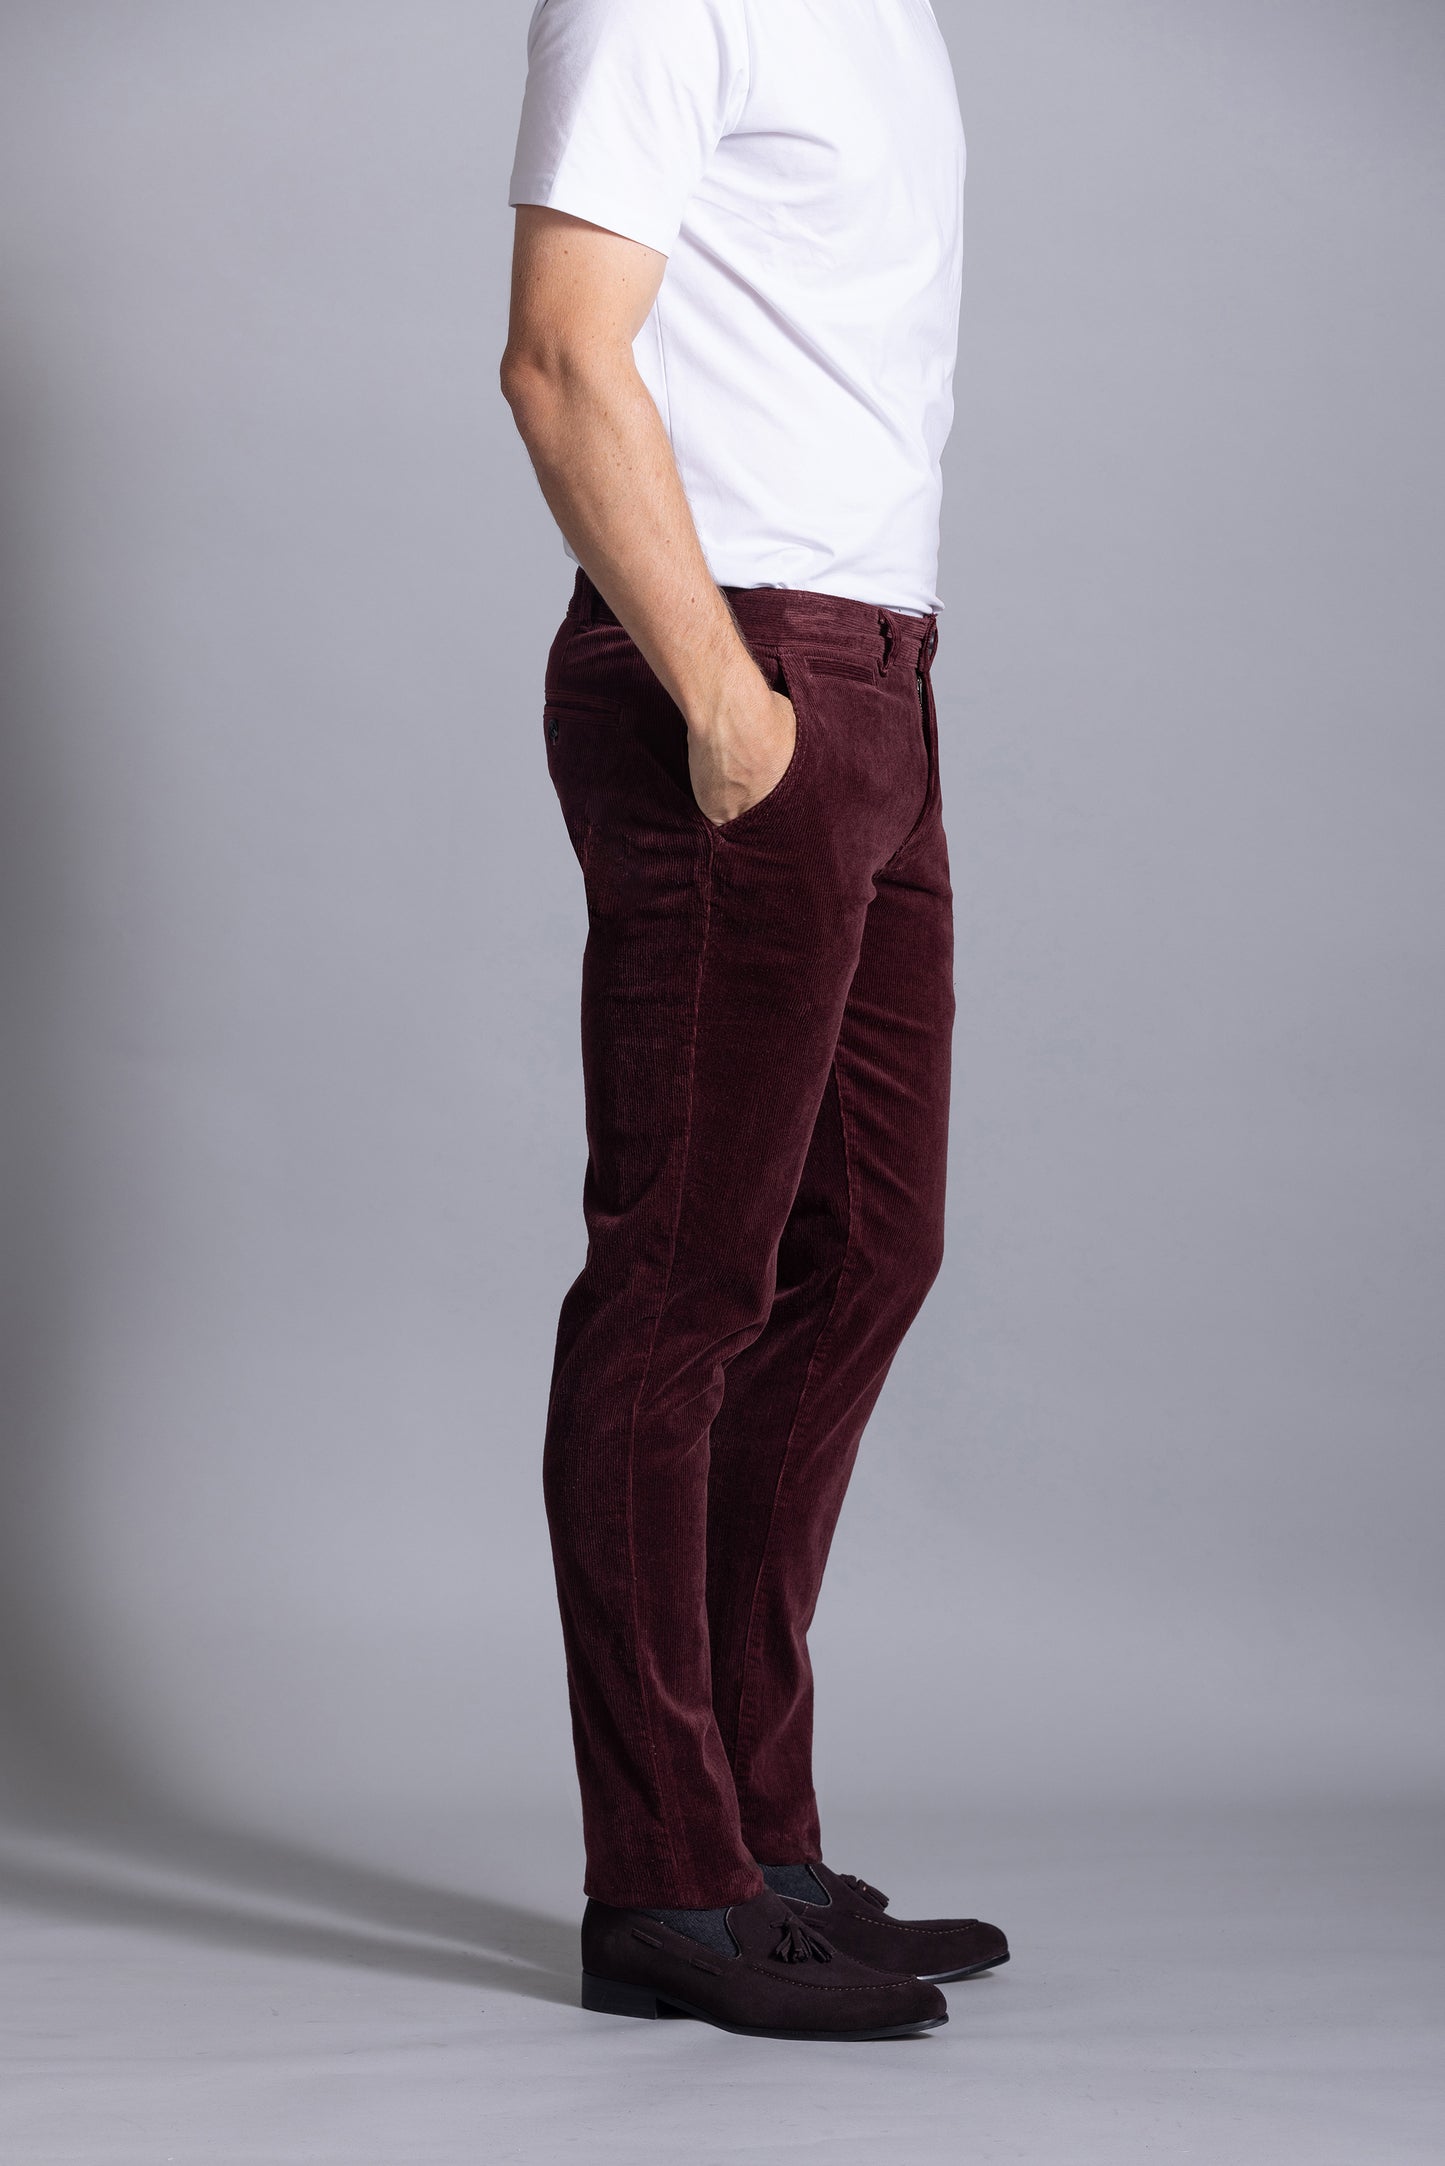 Cutler & Co - Hastin Cord Trousers - Schist or Port